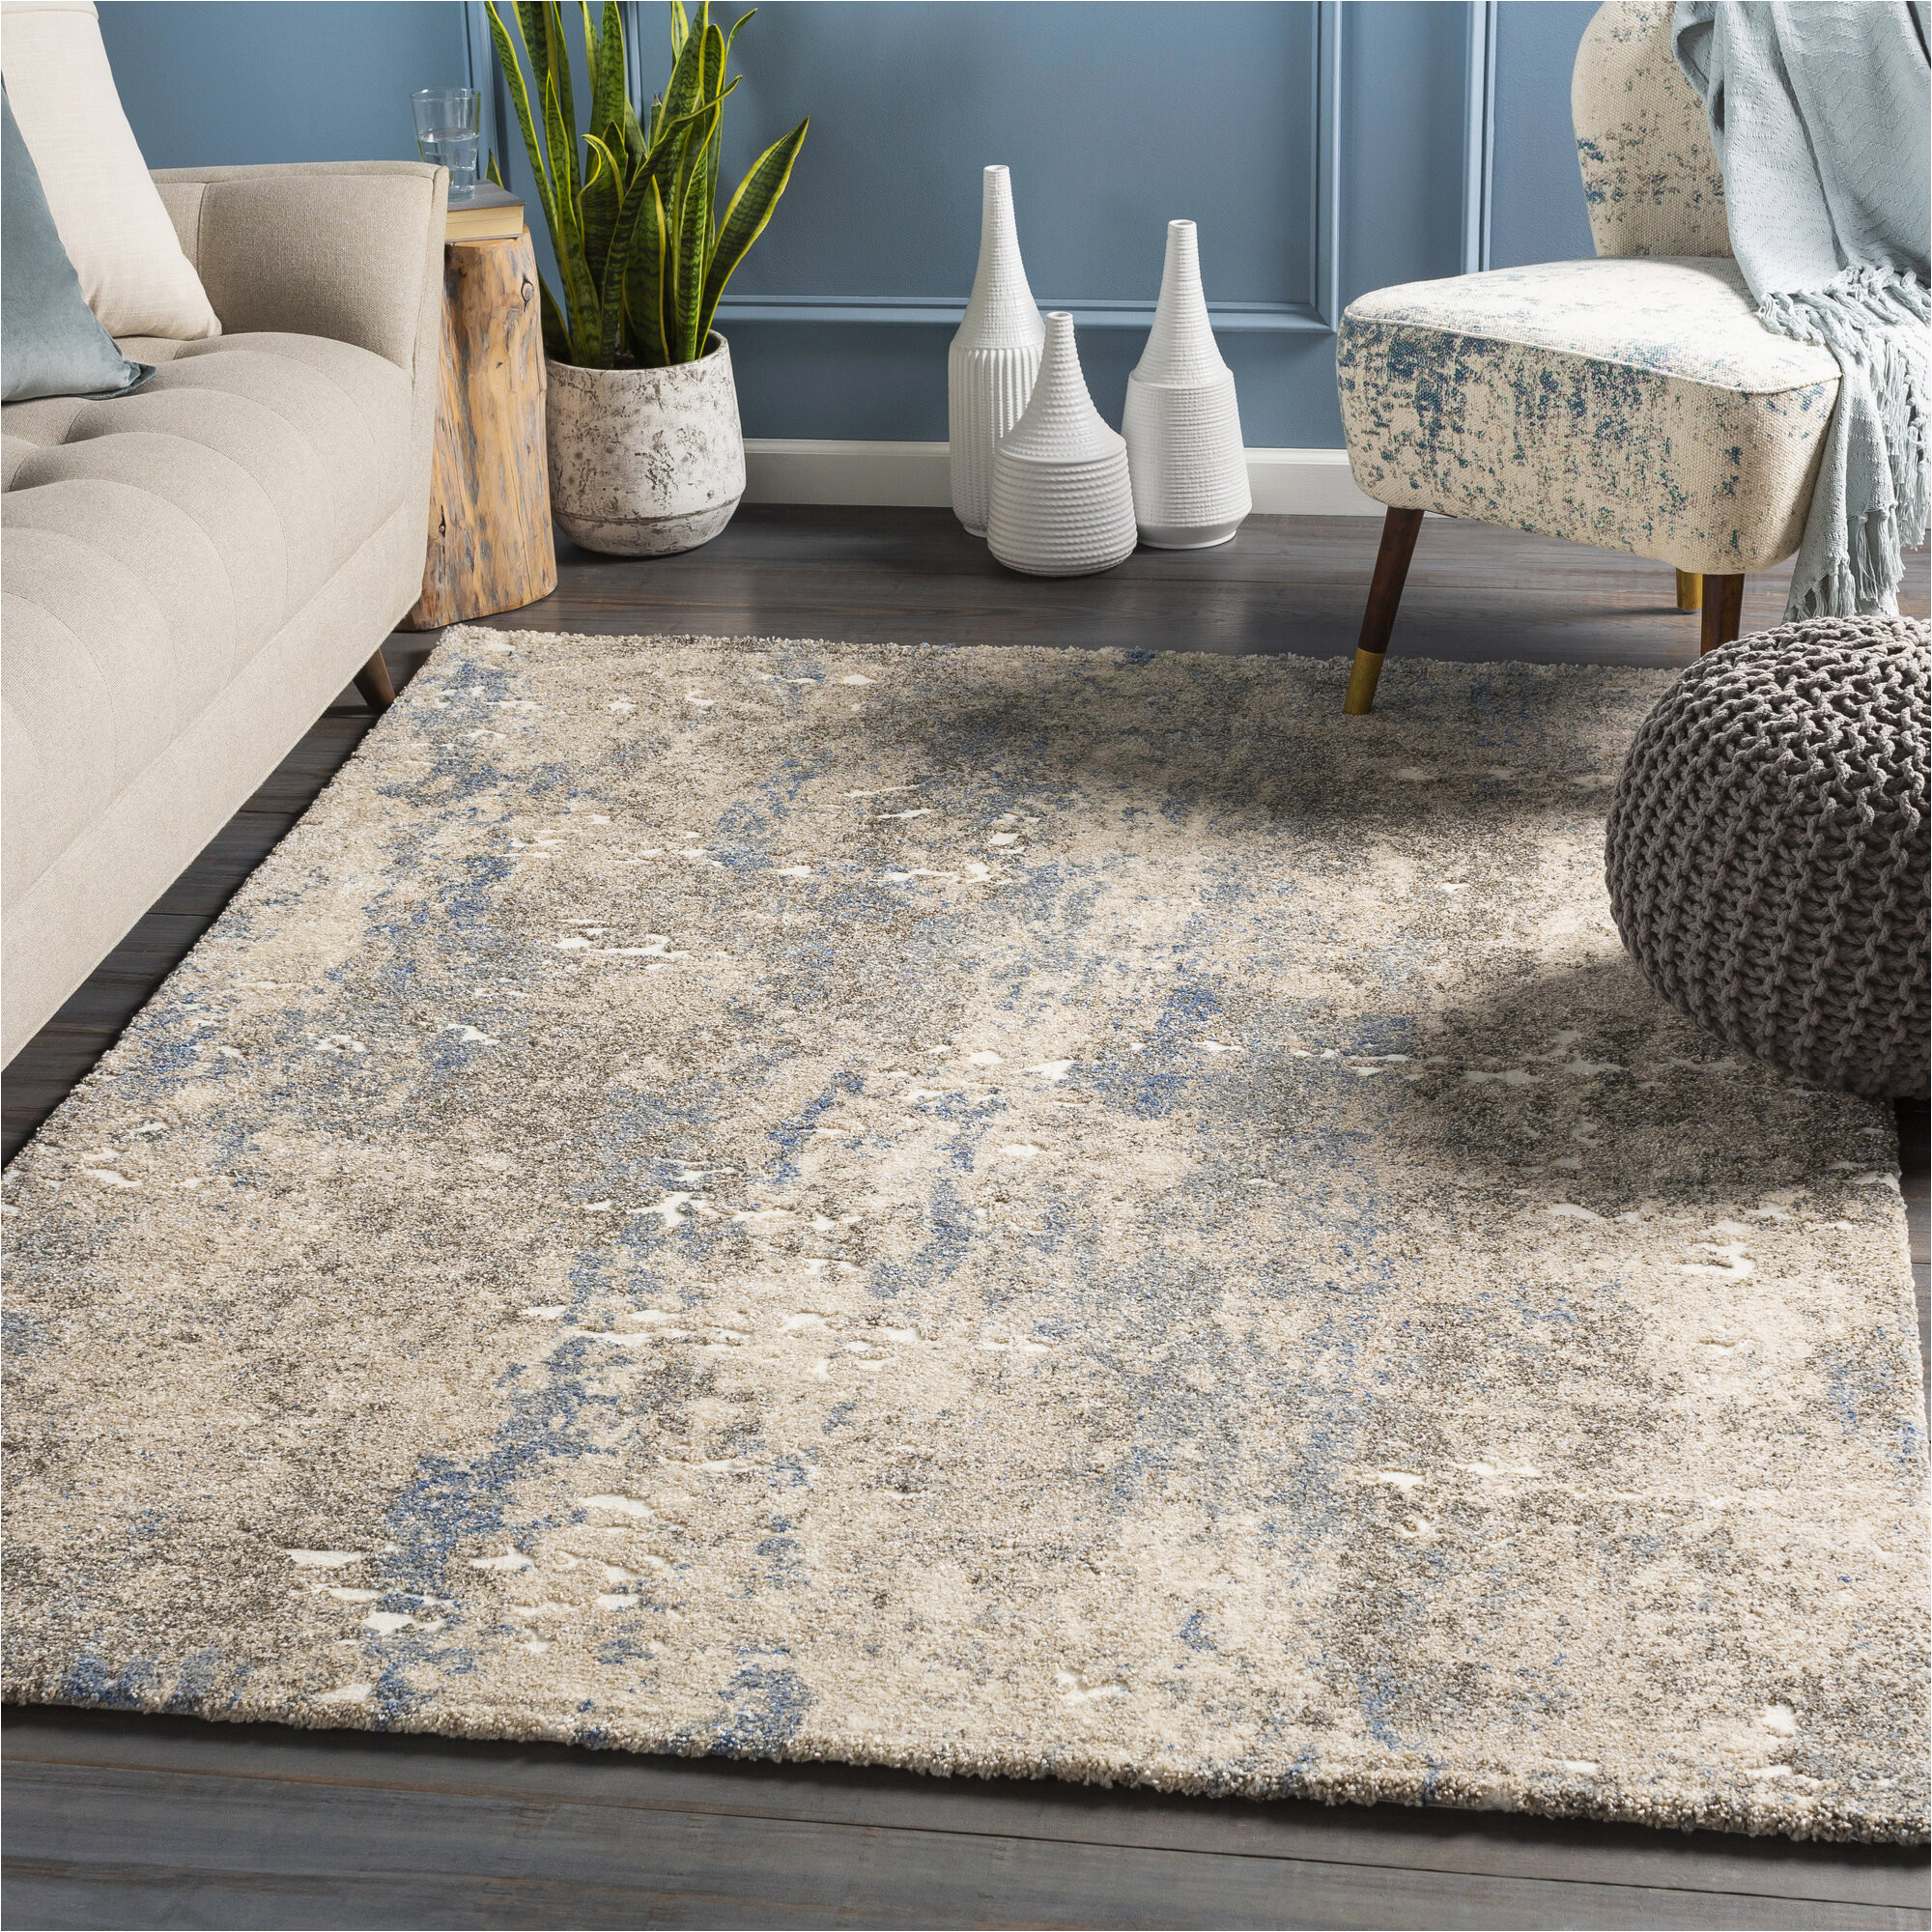 Area Rugs Beige and Gray Madison Avenue Blue/beige/gray area Rug